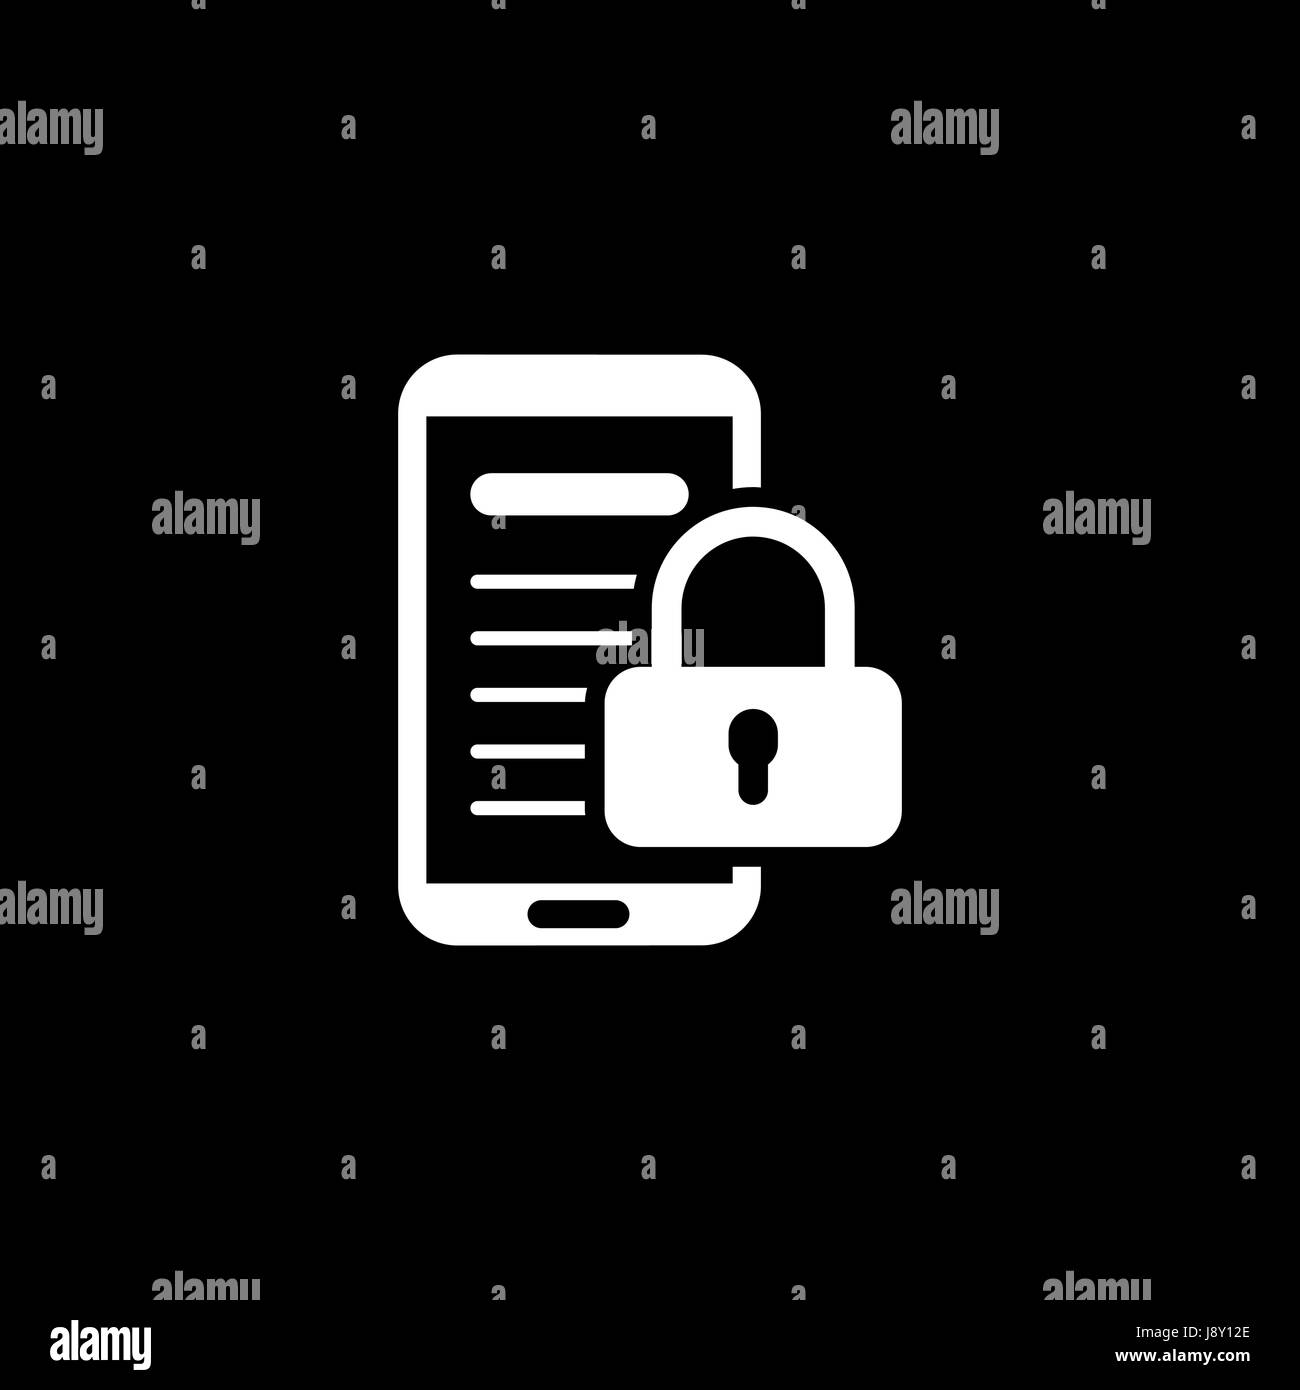 Mobile Security Icon. Flat Design. Stock Vector